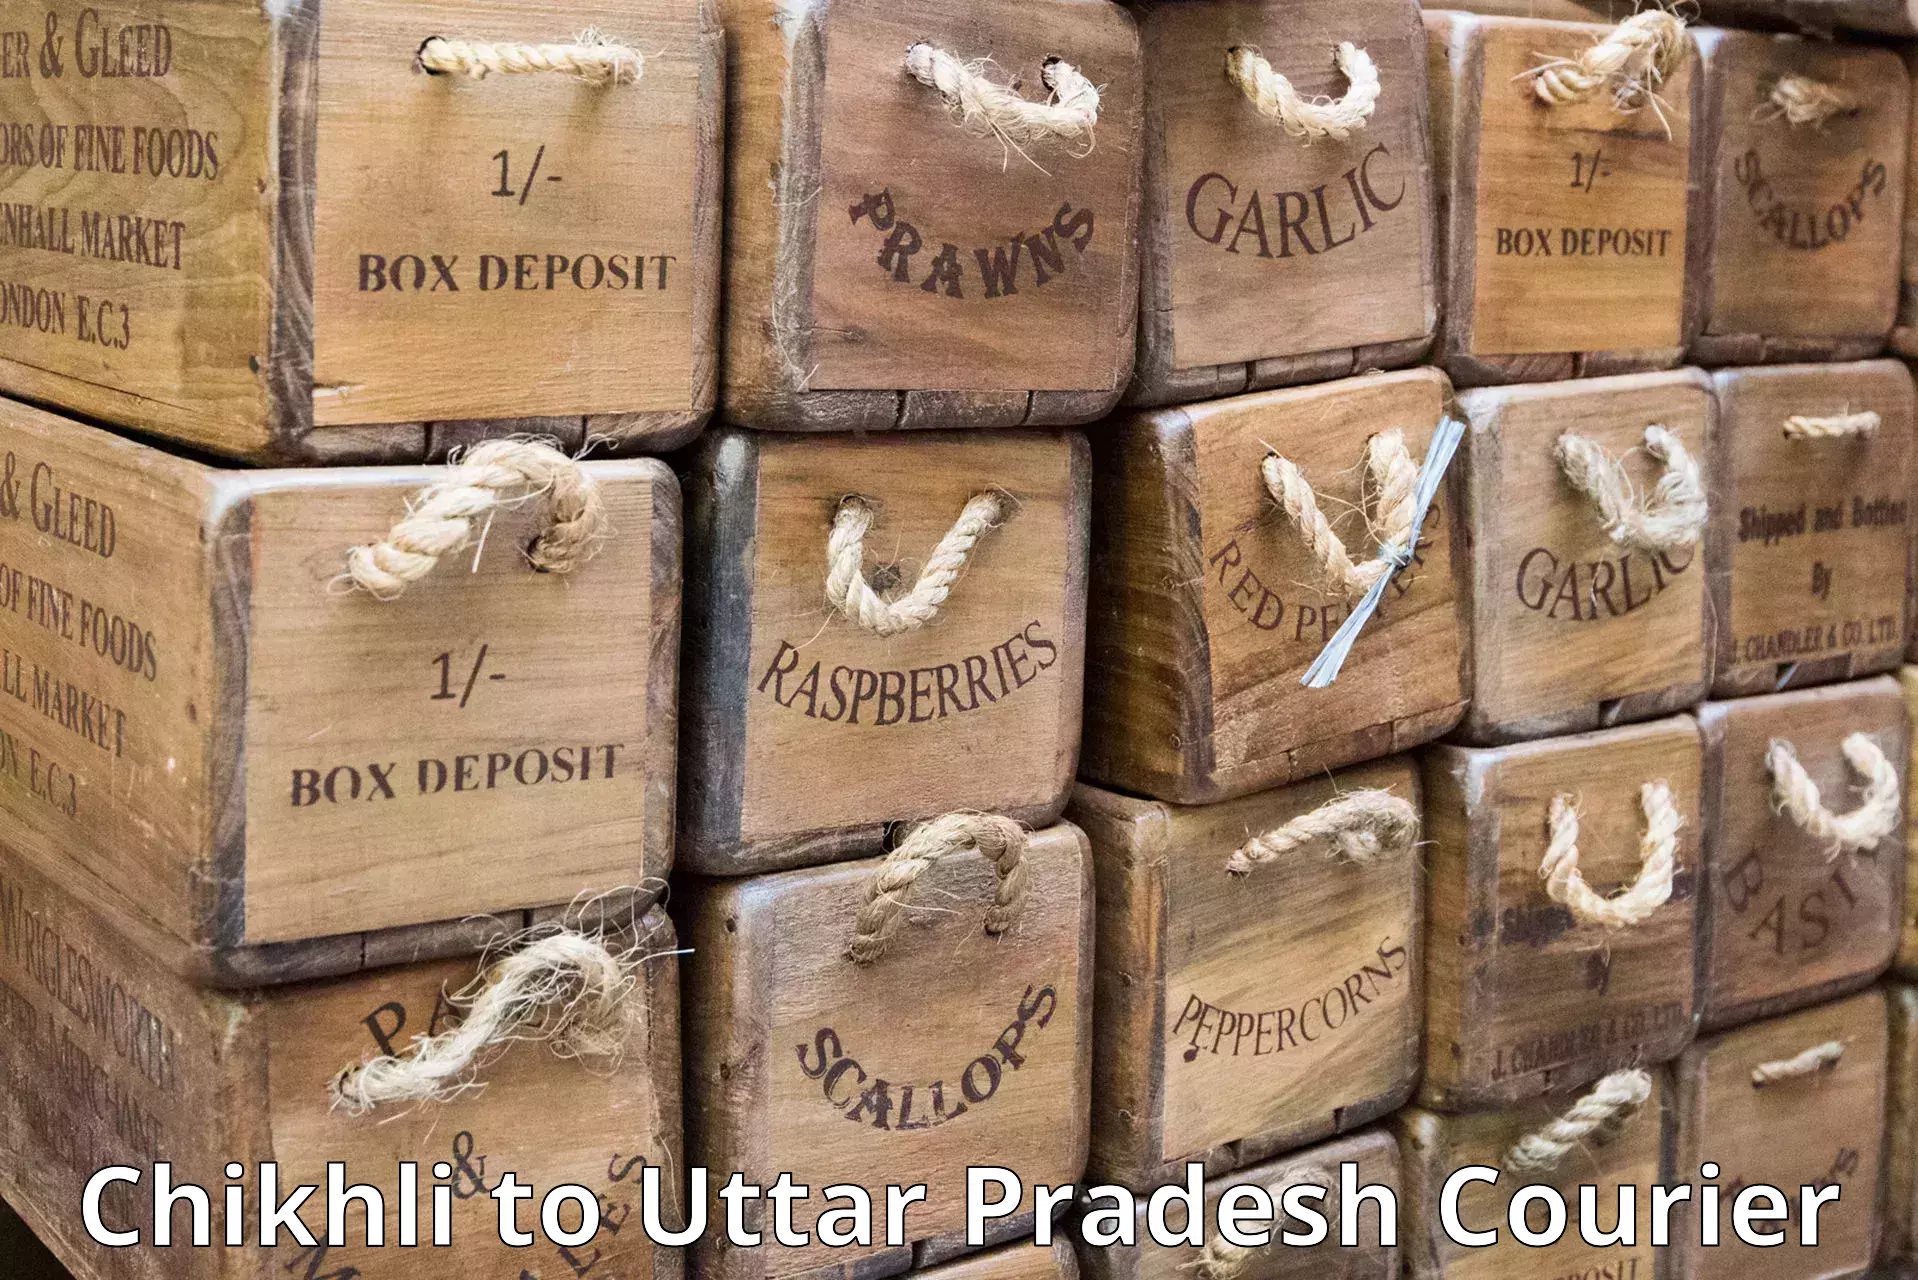 Courier service booking Chikhli to Meerut